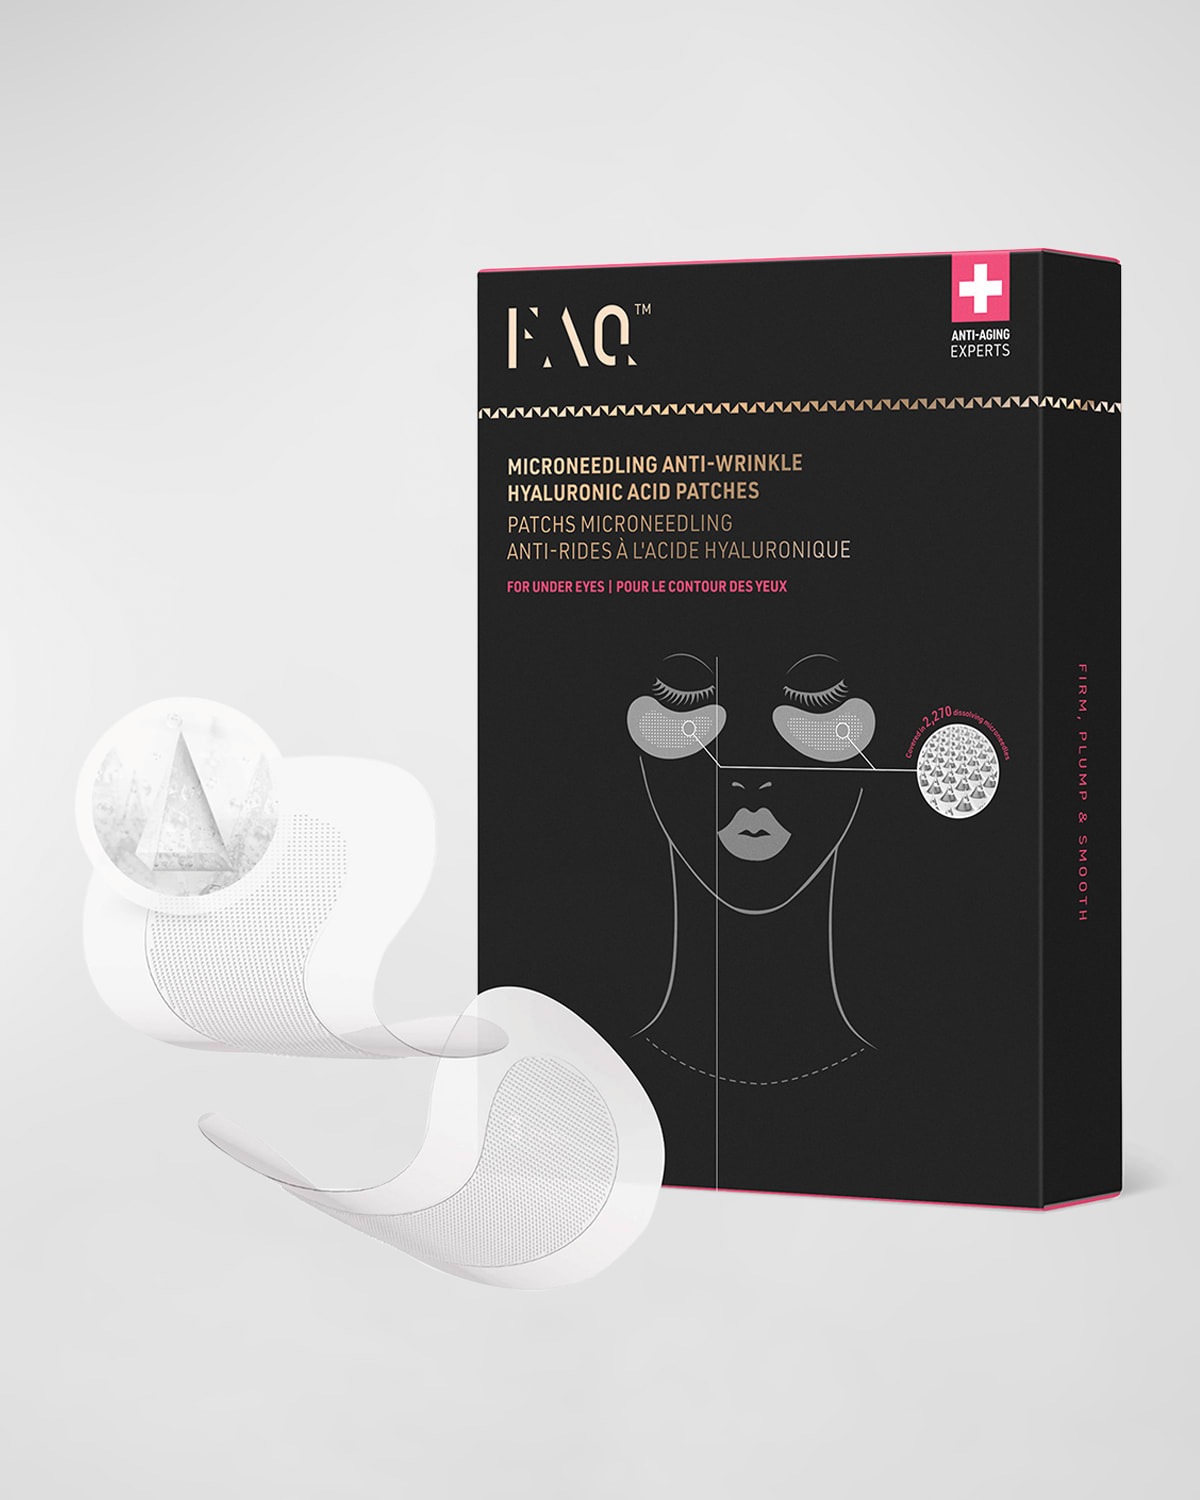 Shop Foreo Faq Microneedling Anti-wrinkle Hyaluronic Acid Patches For Under Eyes